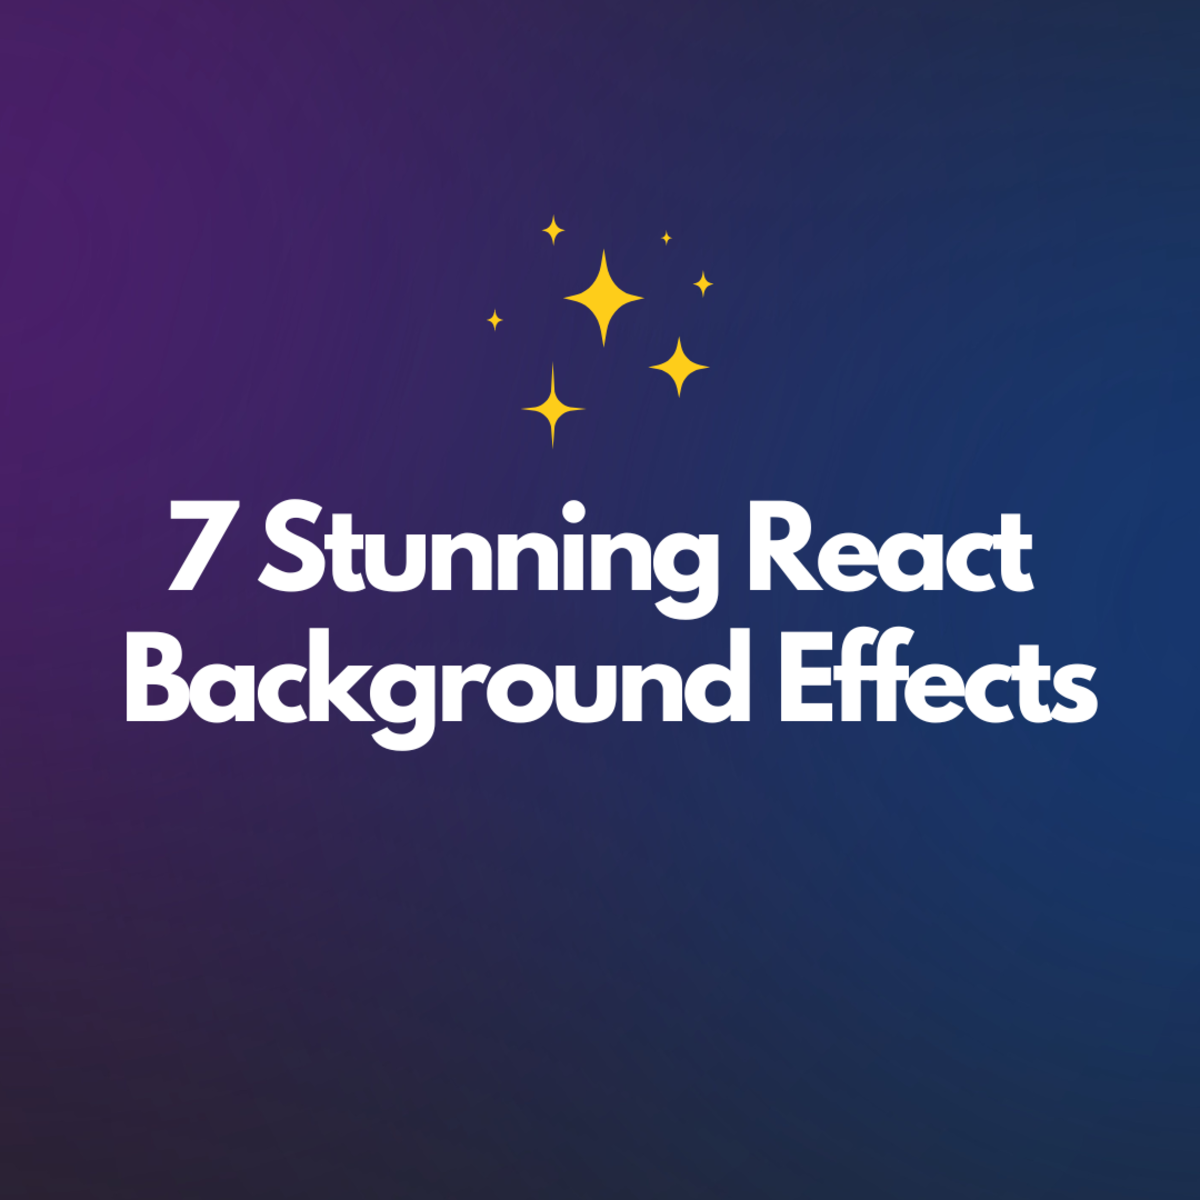 7 Stunning React Background Effects to Check Out: The Ultimate List